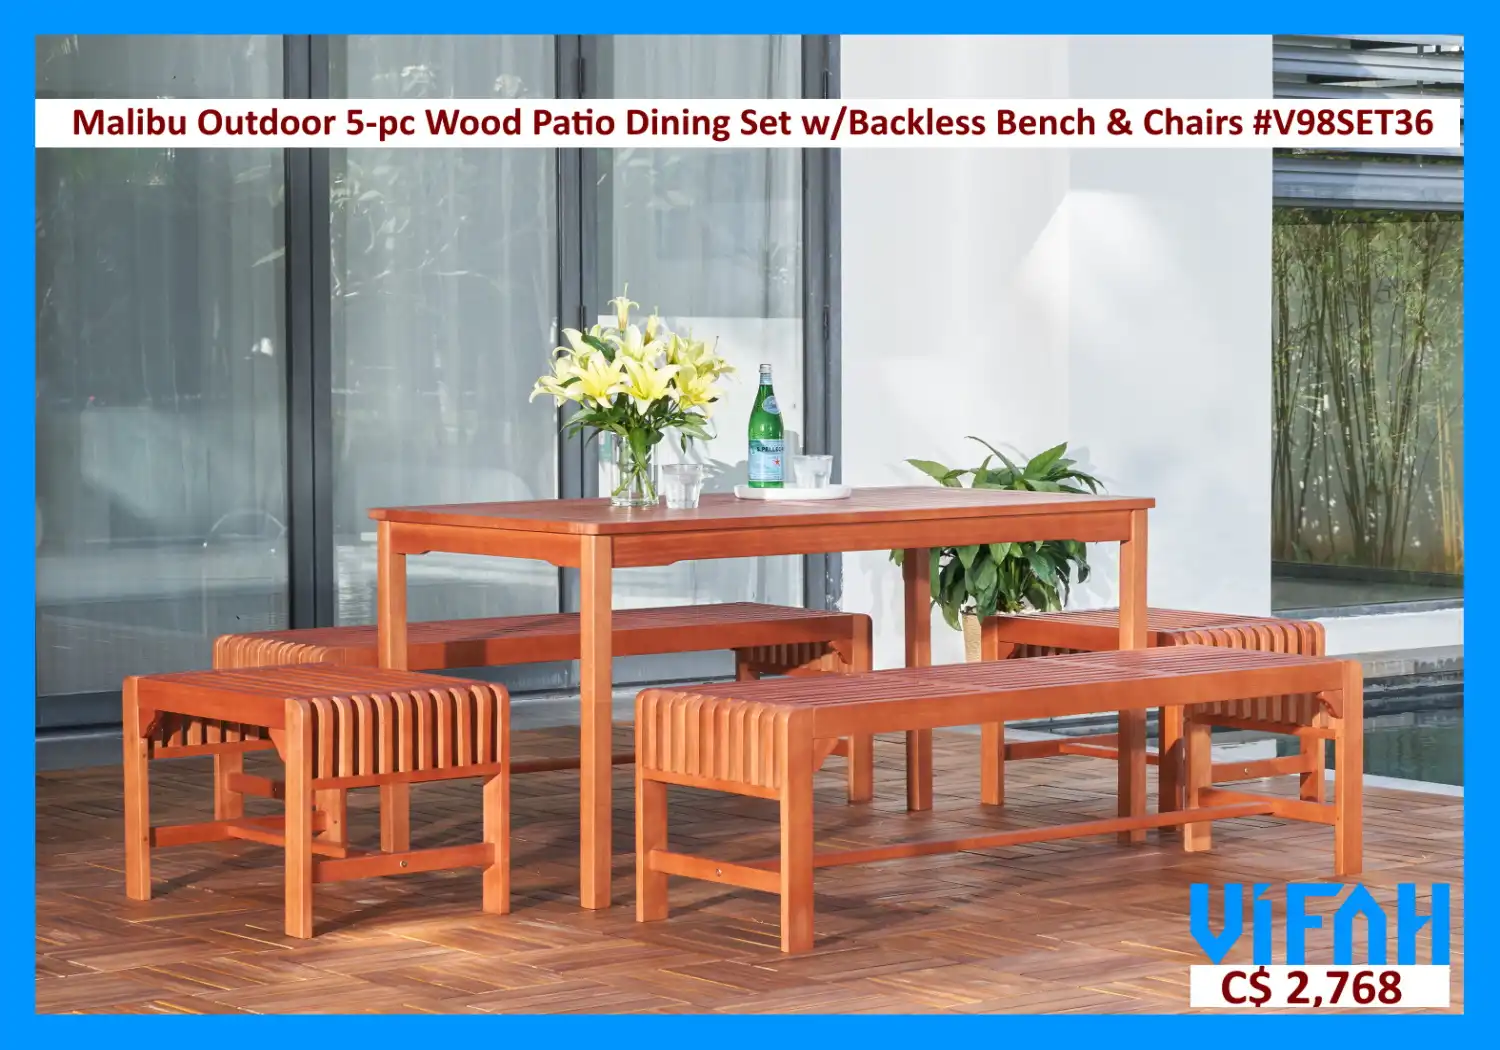 MALIBU Outdoor #V98SET36 5-piece Wood Patio Dining Set with Backless Bench and Chairs